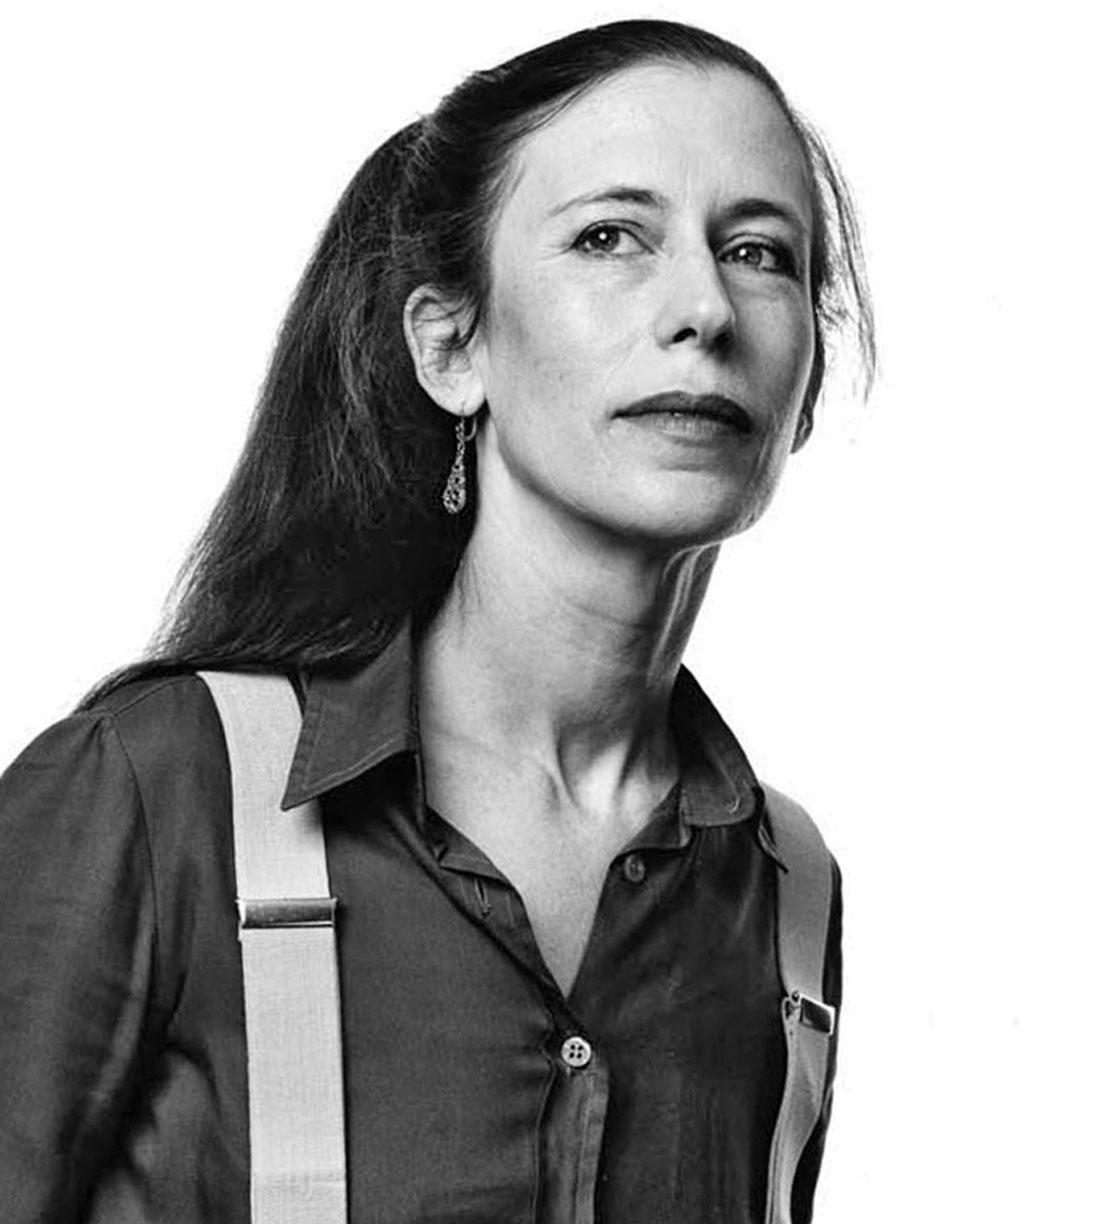 Multi-disciplinary artist & composer Meredith Monk   - Photograph by Jack Mitchell